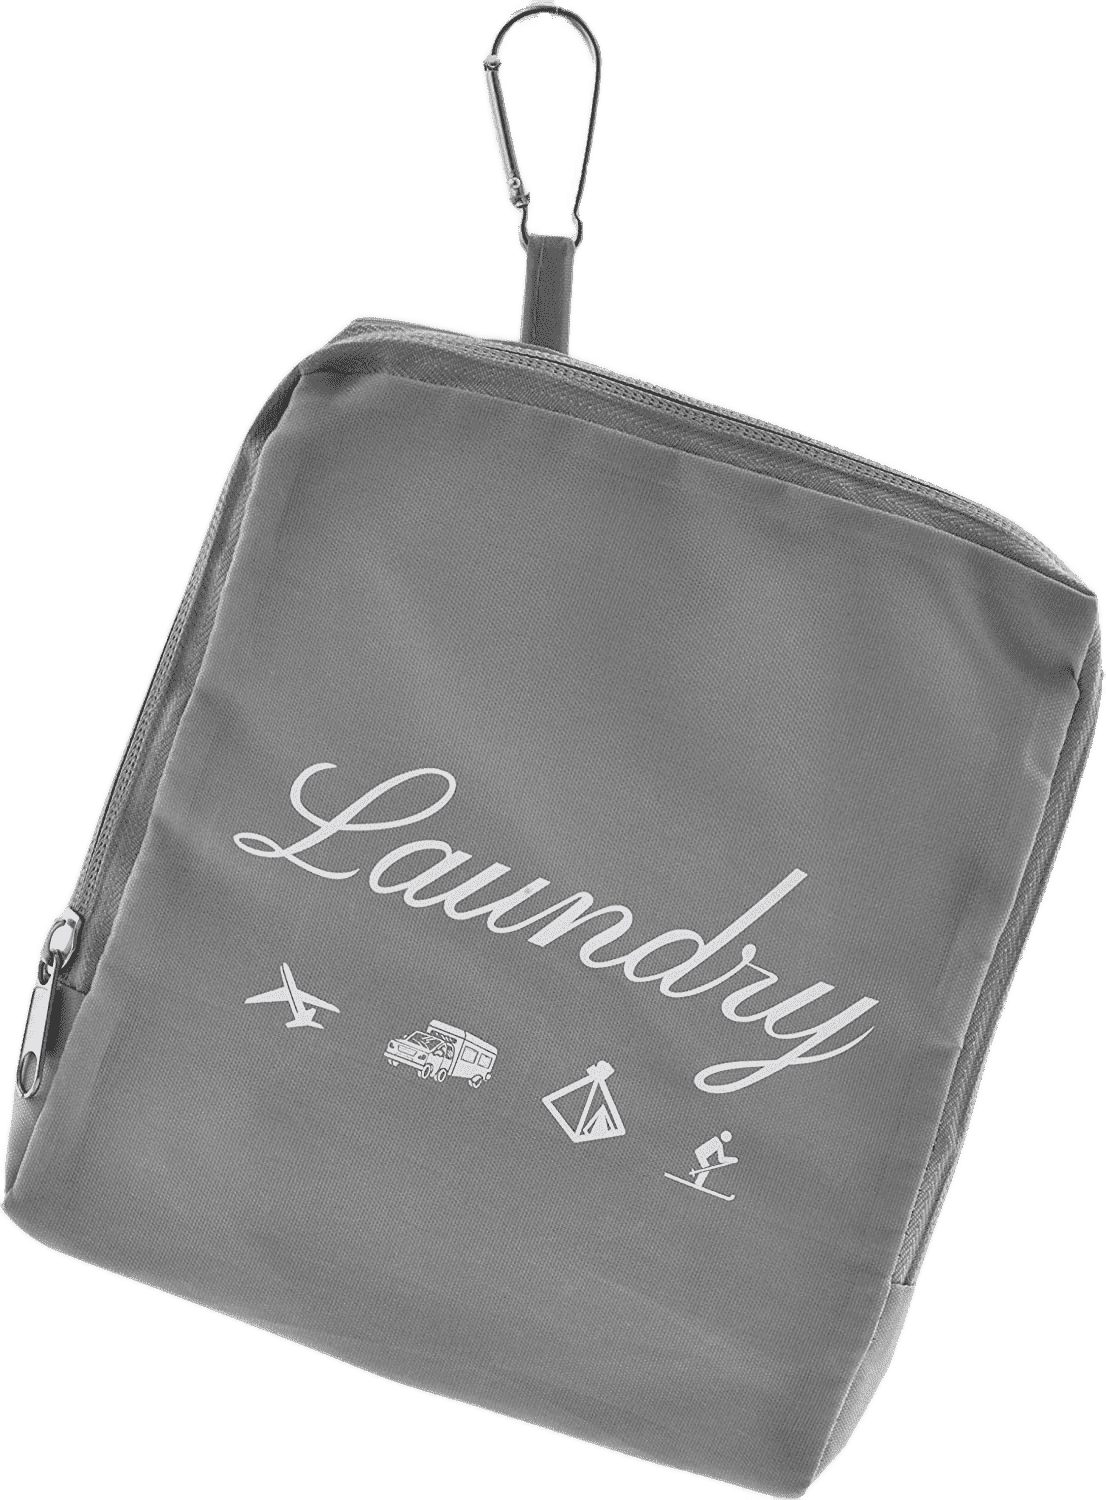 JHX Travel Laundry Bag Travel Accessories Every Woman Needs